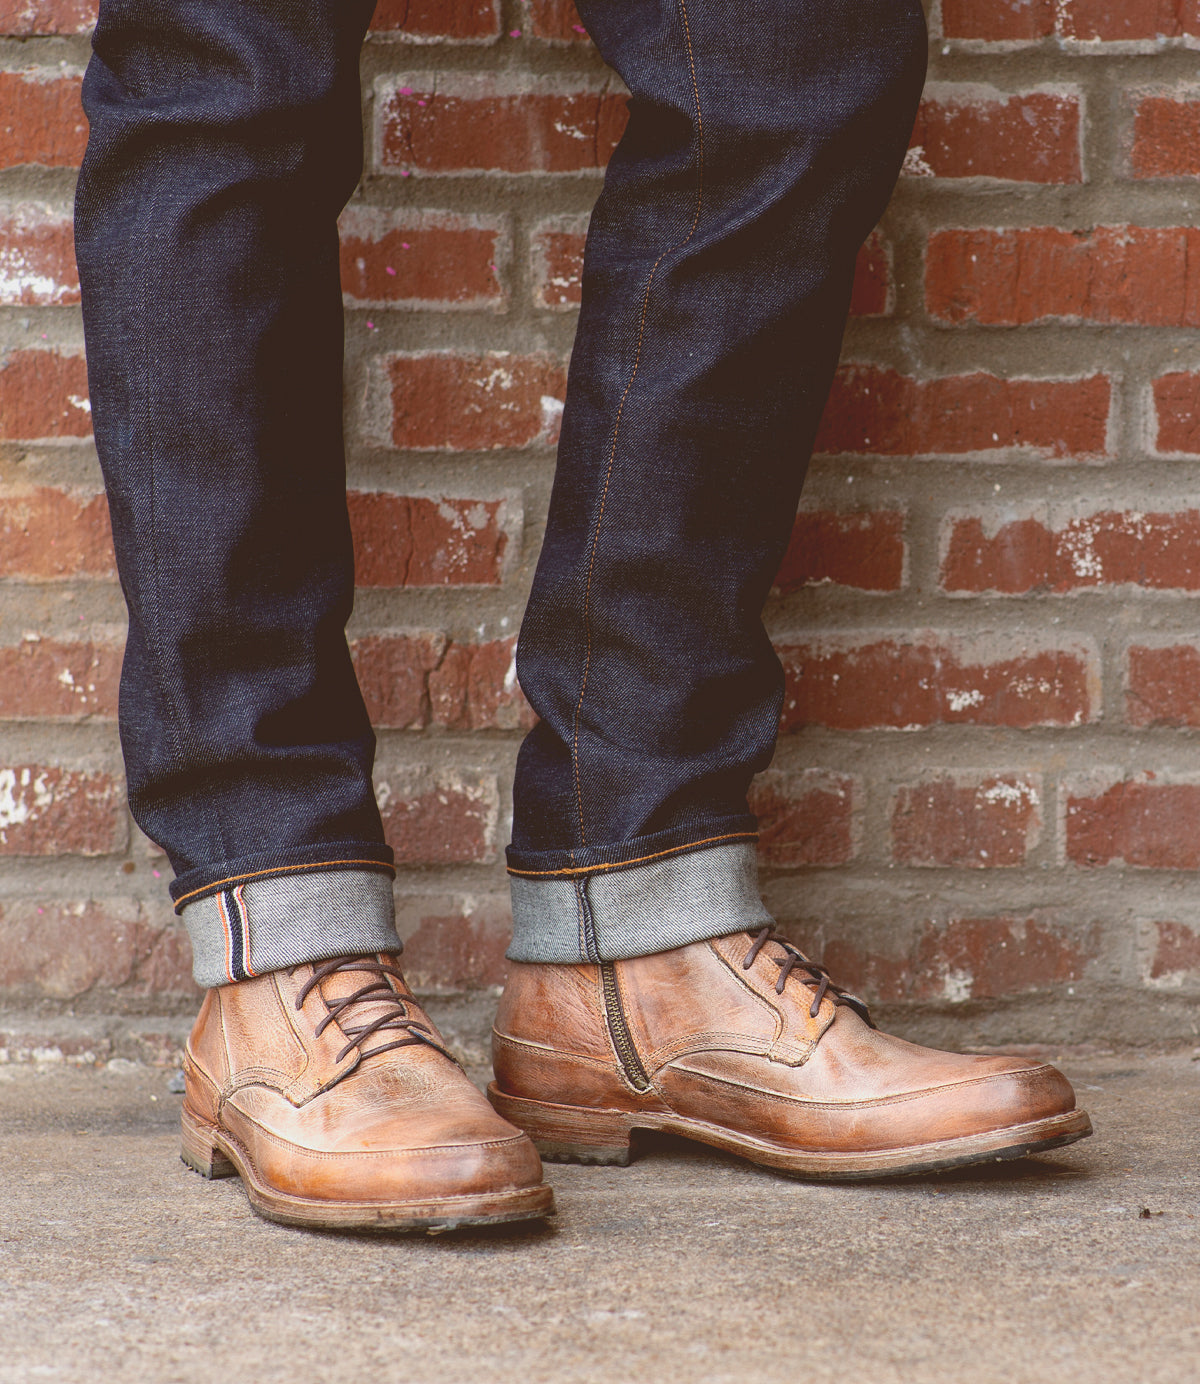 A person wearing Bed Stu Spiker Teak Rustic Boots and cuffed jeans standing against a brick wall.